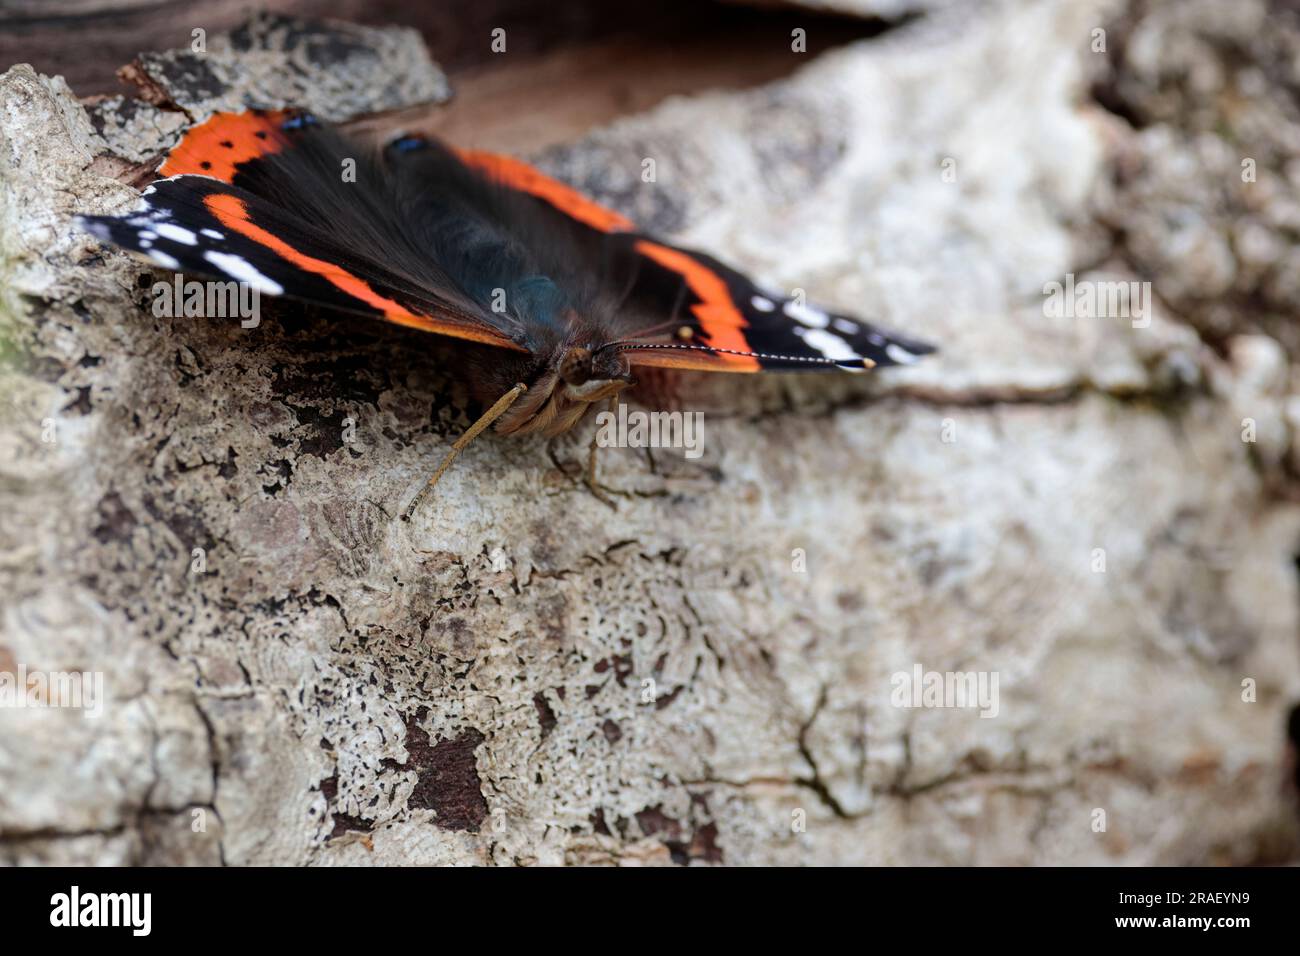 Red admiral butterfly Vannesa atalanta, upperwings black with red bands and white spots underwings marbled smoky grey 60mm sunbathing summer season uk Stock Photo